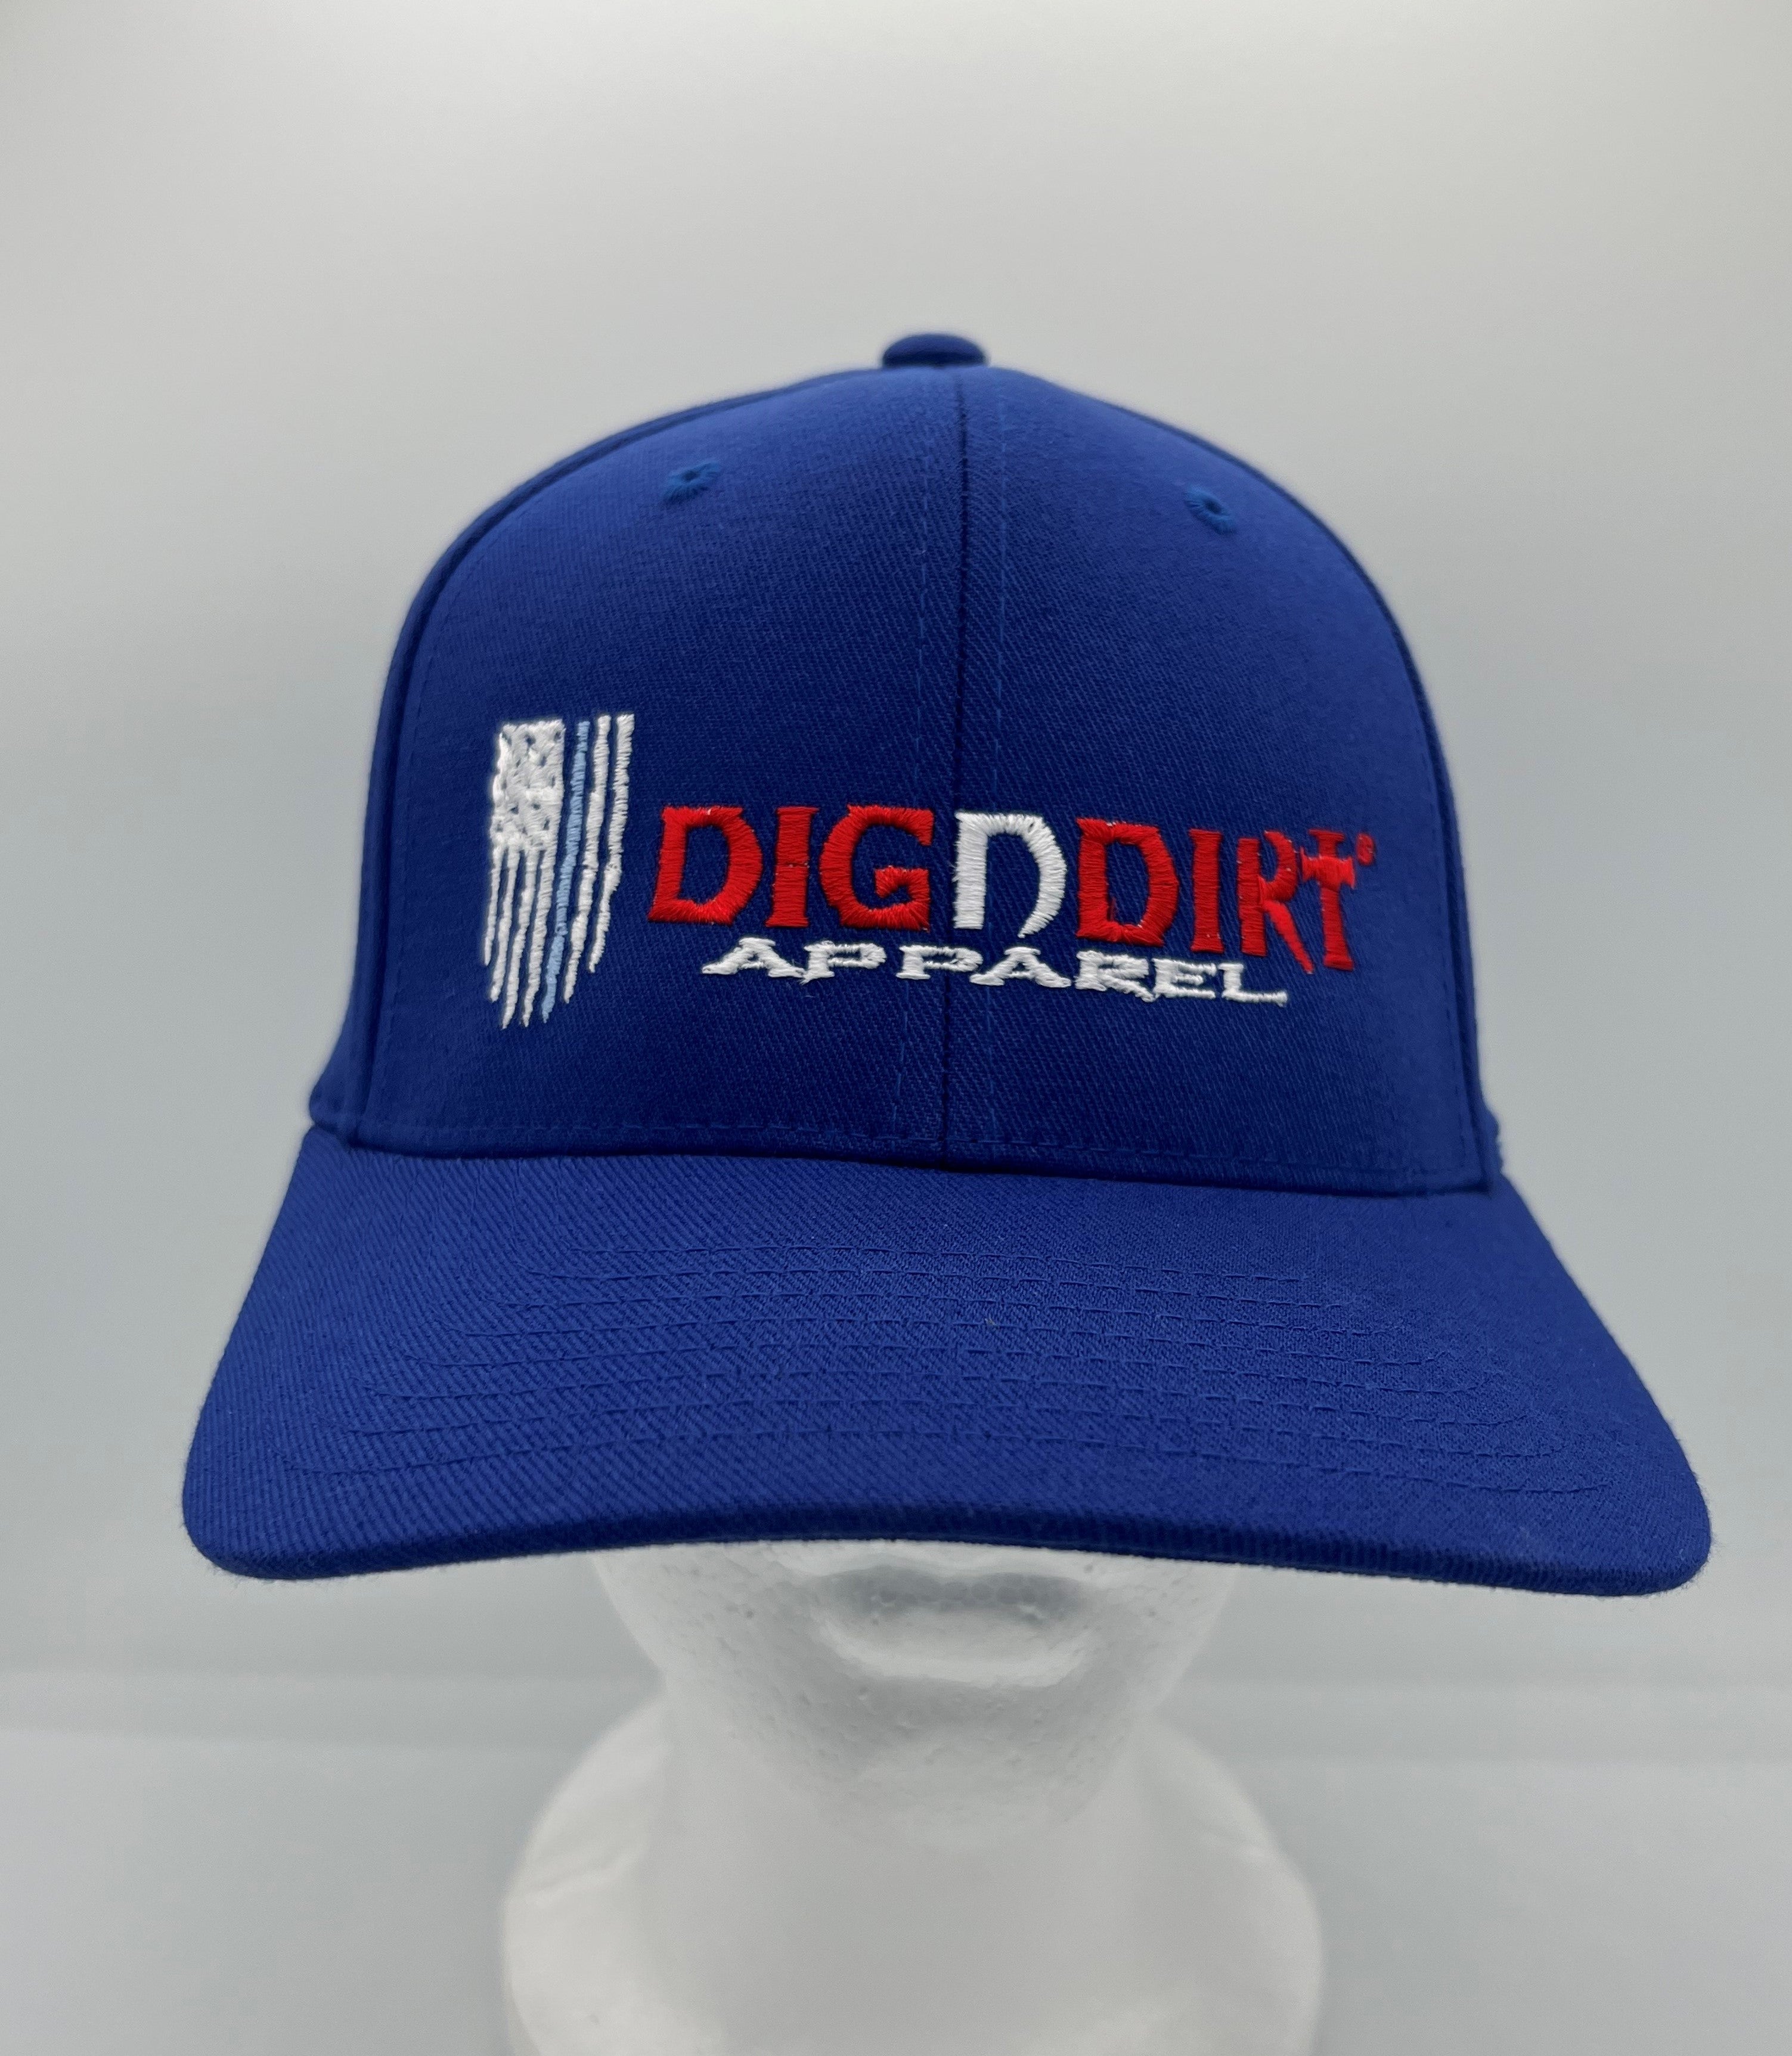 DIGNDIRT Apparel FlexFit Hat Blue Red and White